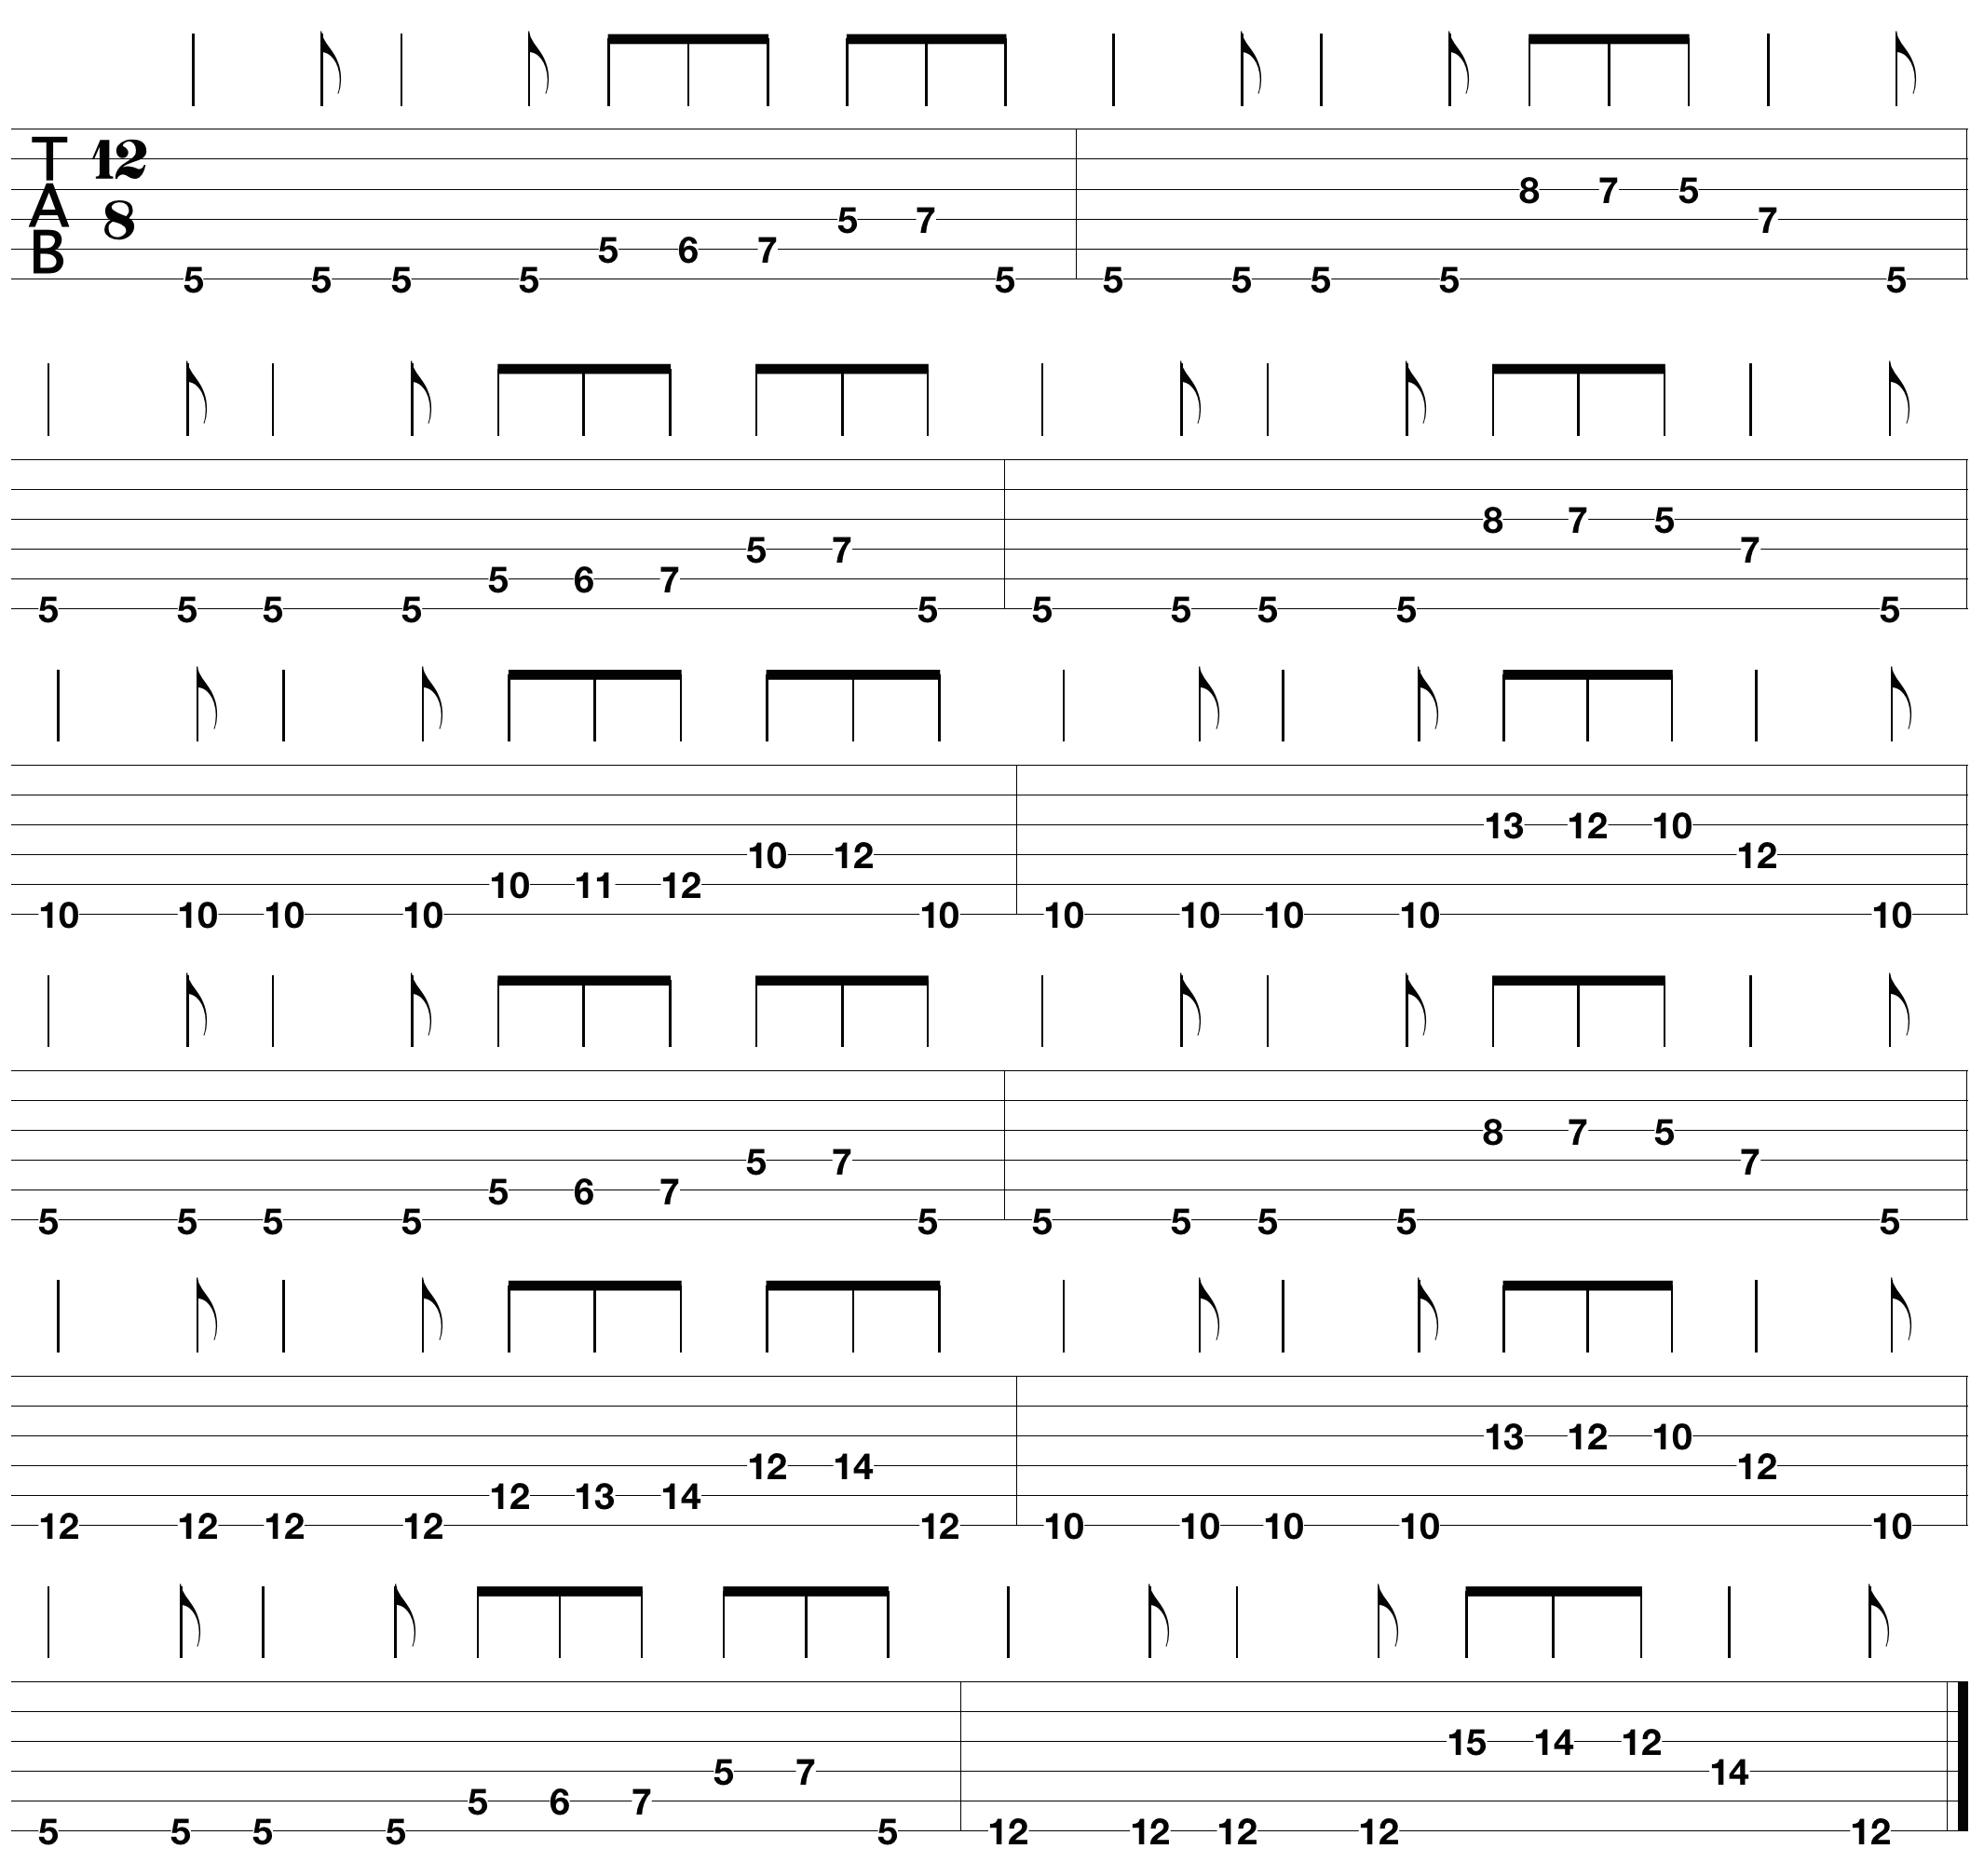 blues-guitar-scales-tabs_3.png.